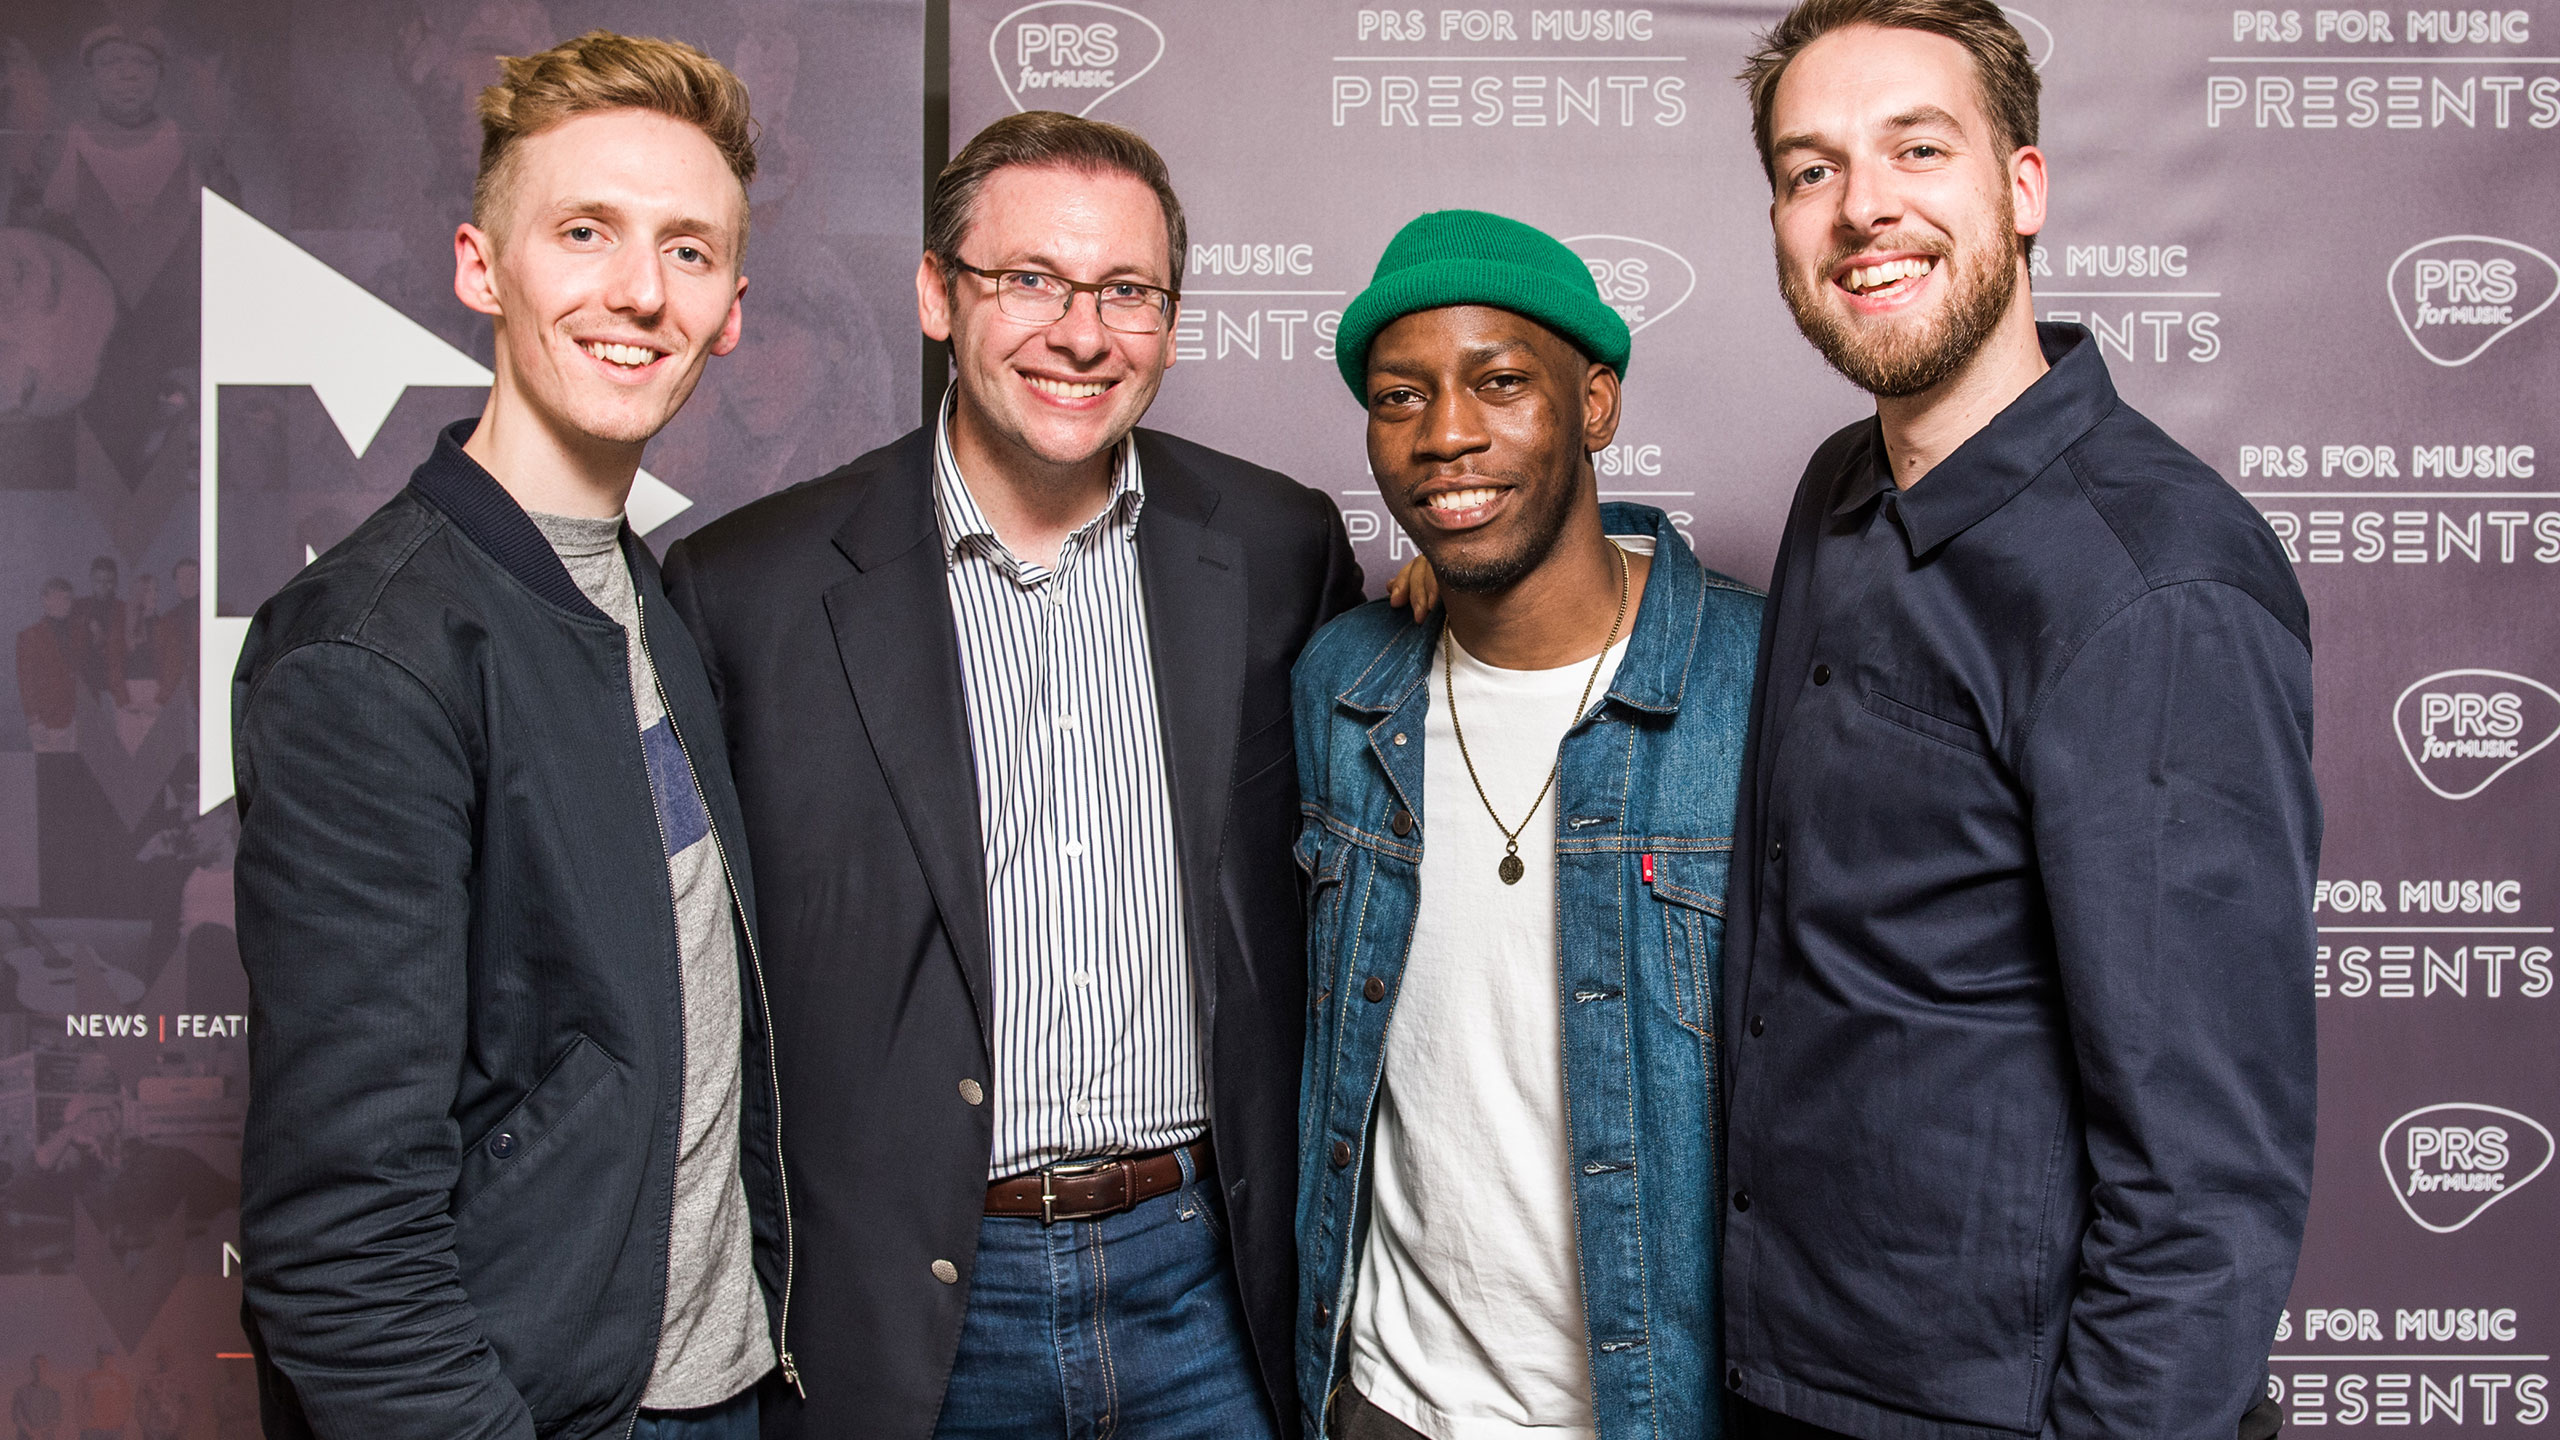 James Hatcher (Honne), Paul Clements (executive director of membership at PRS for Music), Tiggs Da Author and Andy Clutterbuck (Honne) at PRS Presents